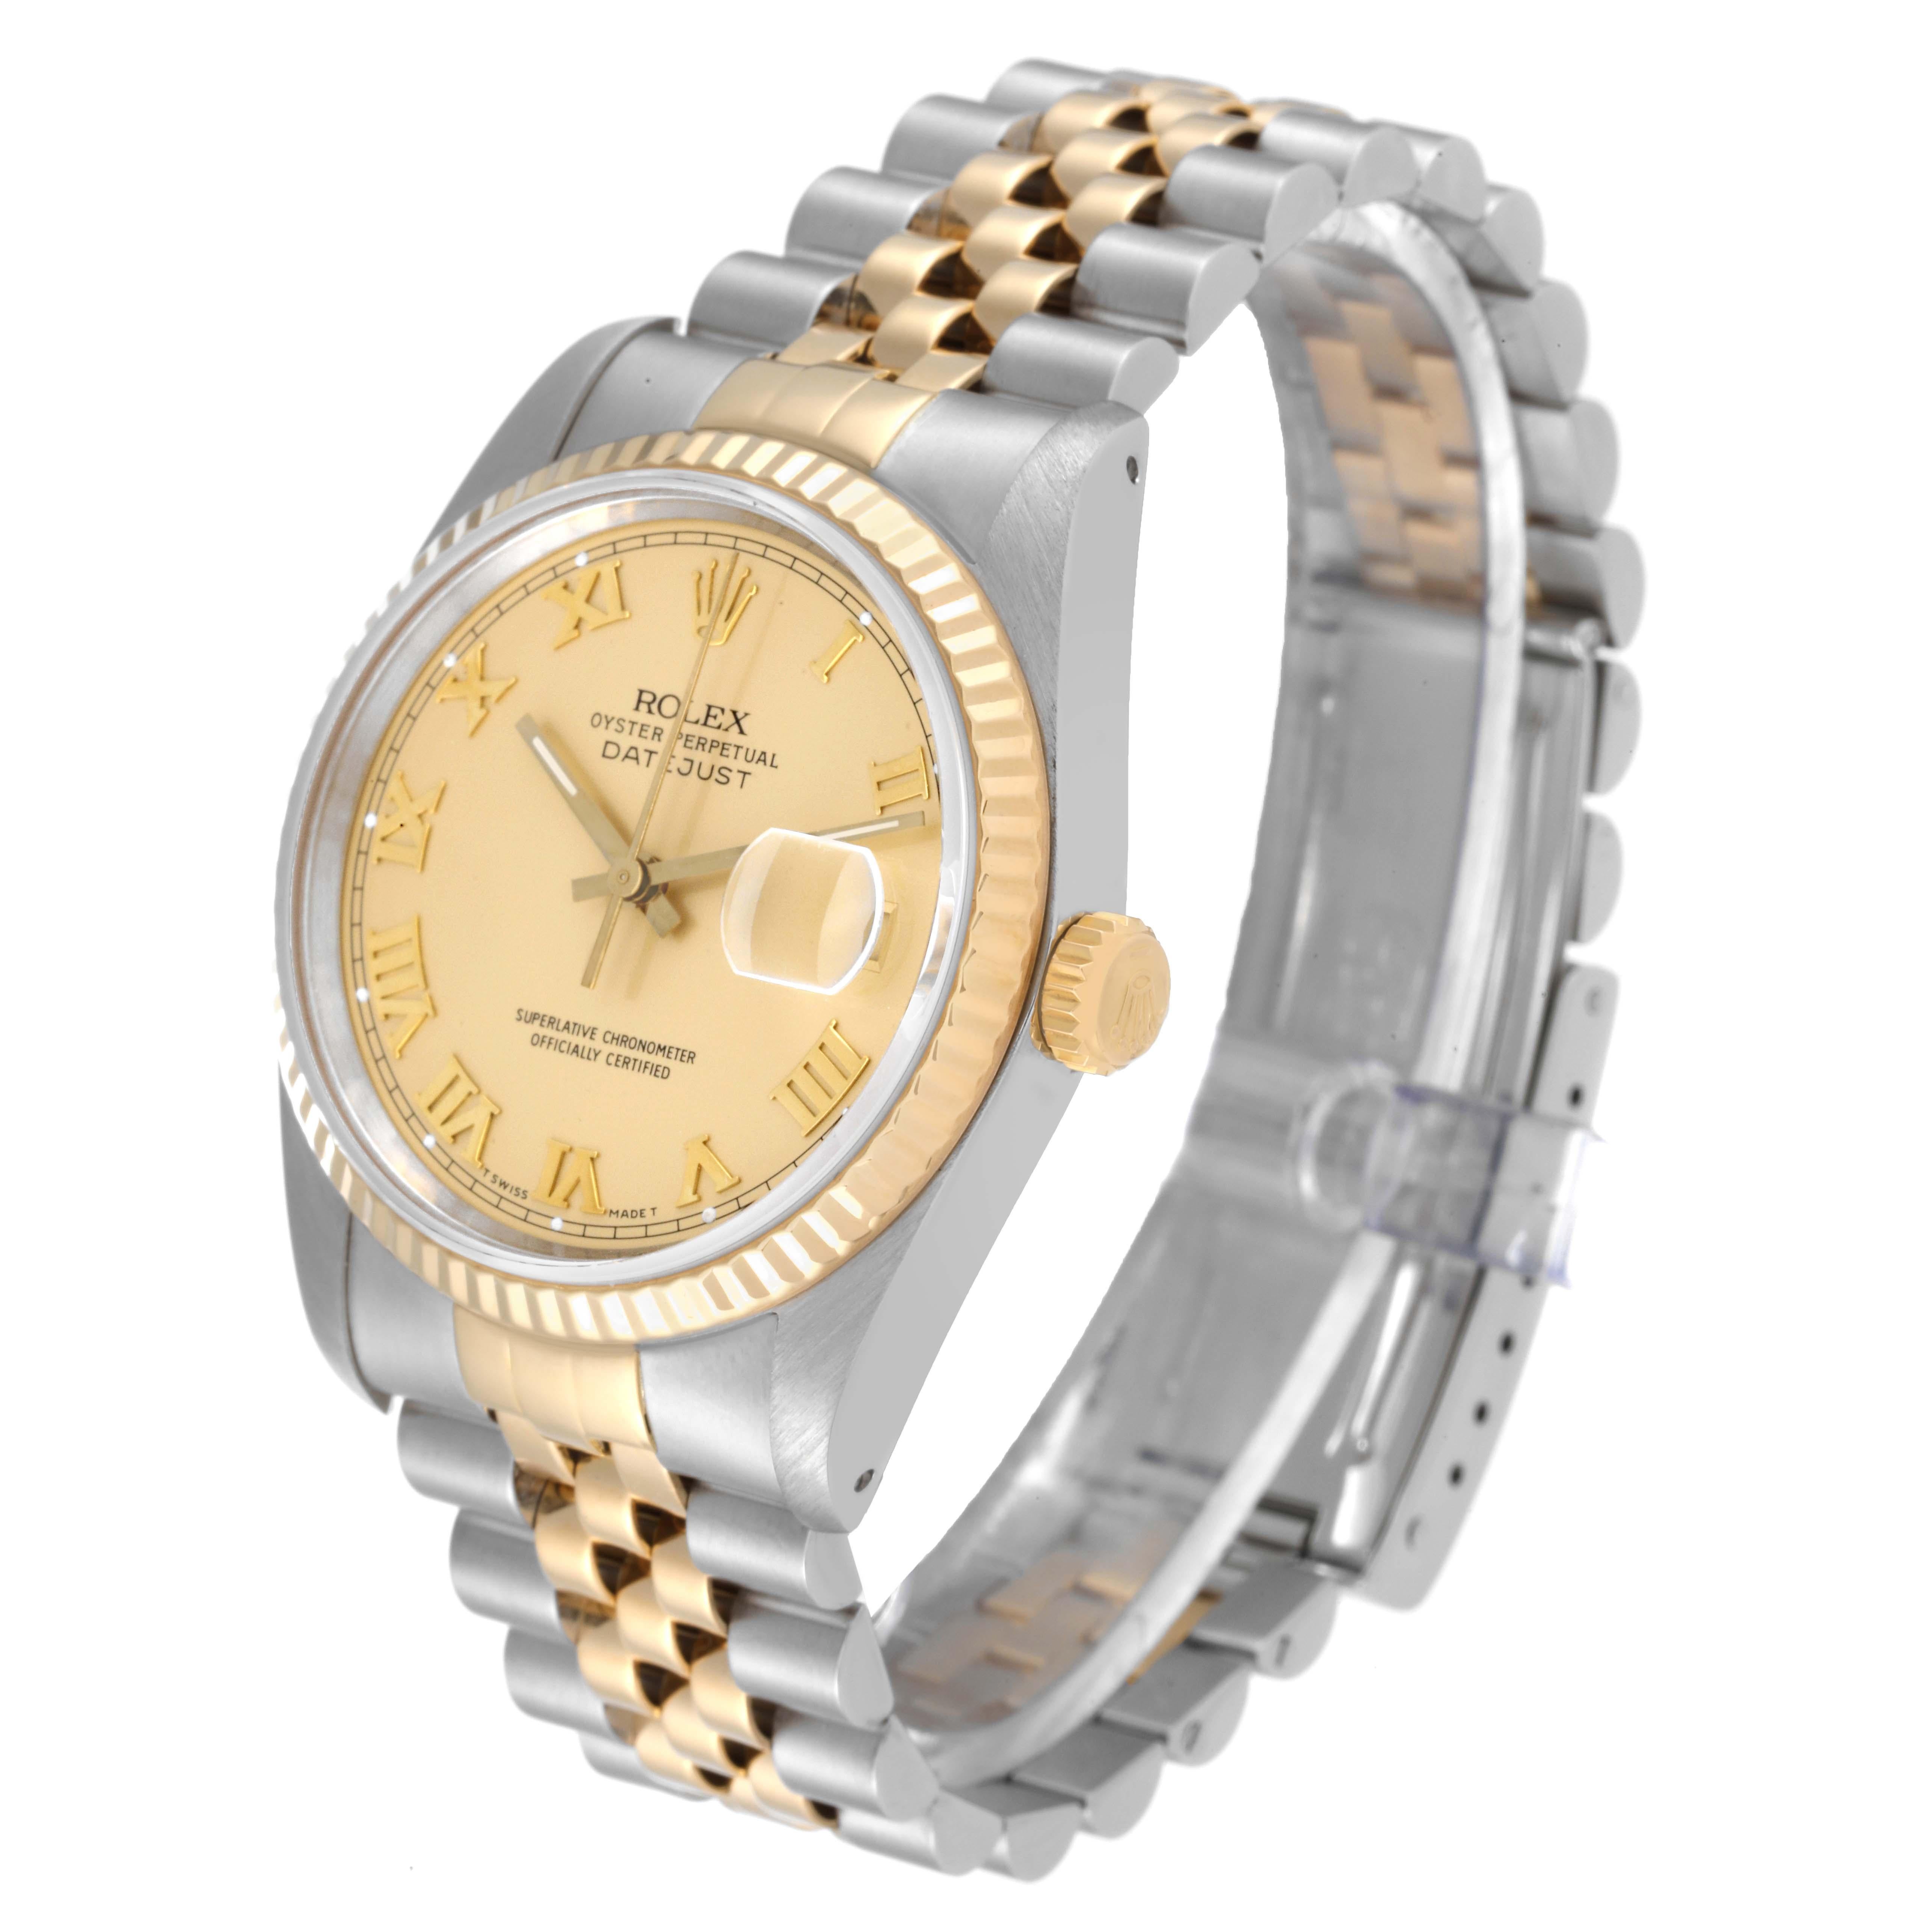 Rolex Datejust Steel Yellow Gold Champagne Roman Dial Mens Watch 16233 In Excellent Condition For Sale In Atlanta, GA